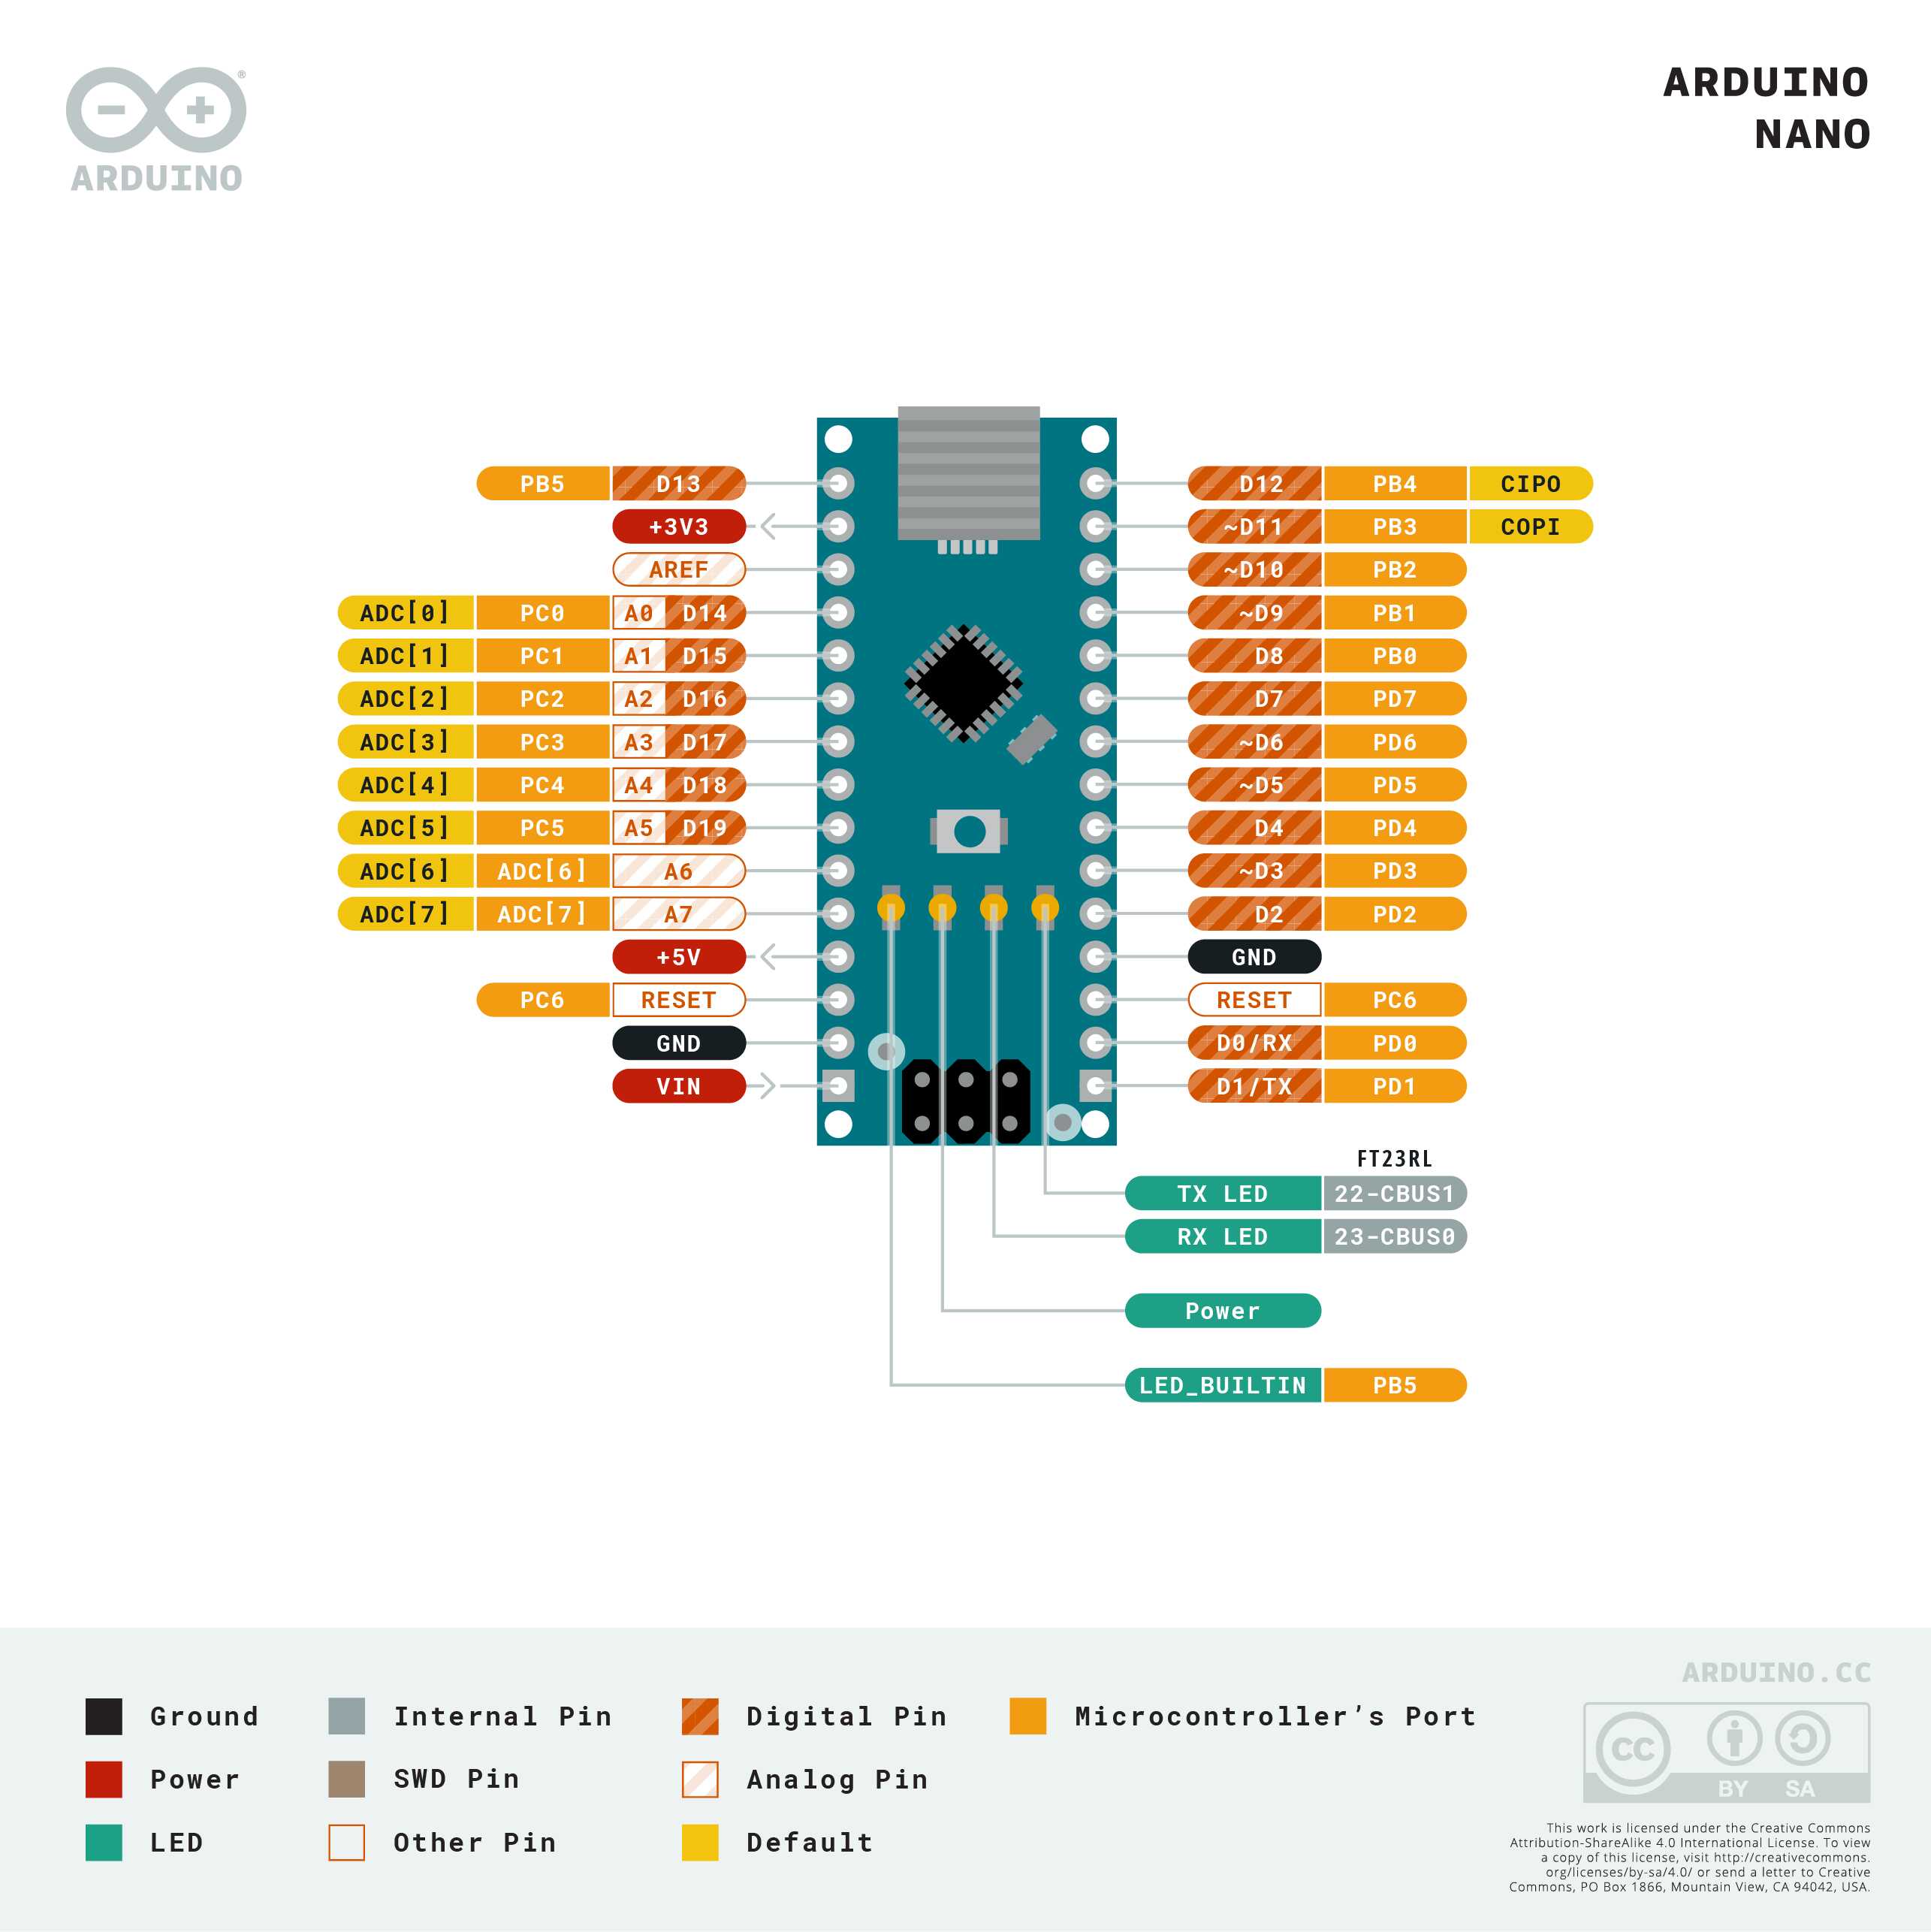 A pinout of the Arduino Nano from the official Arduino documentation